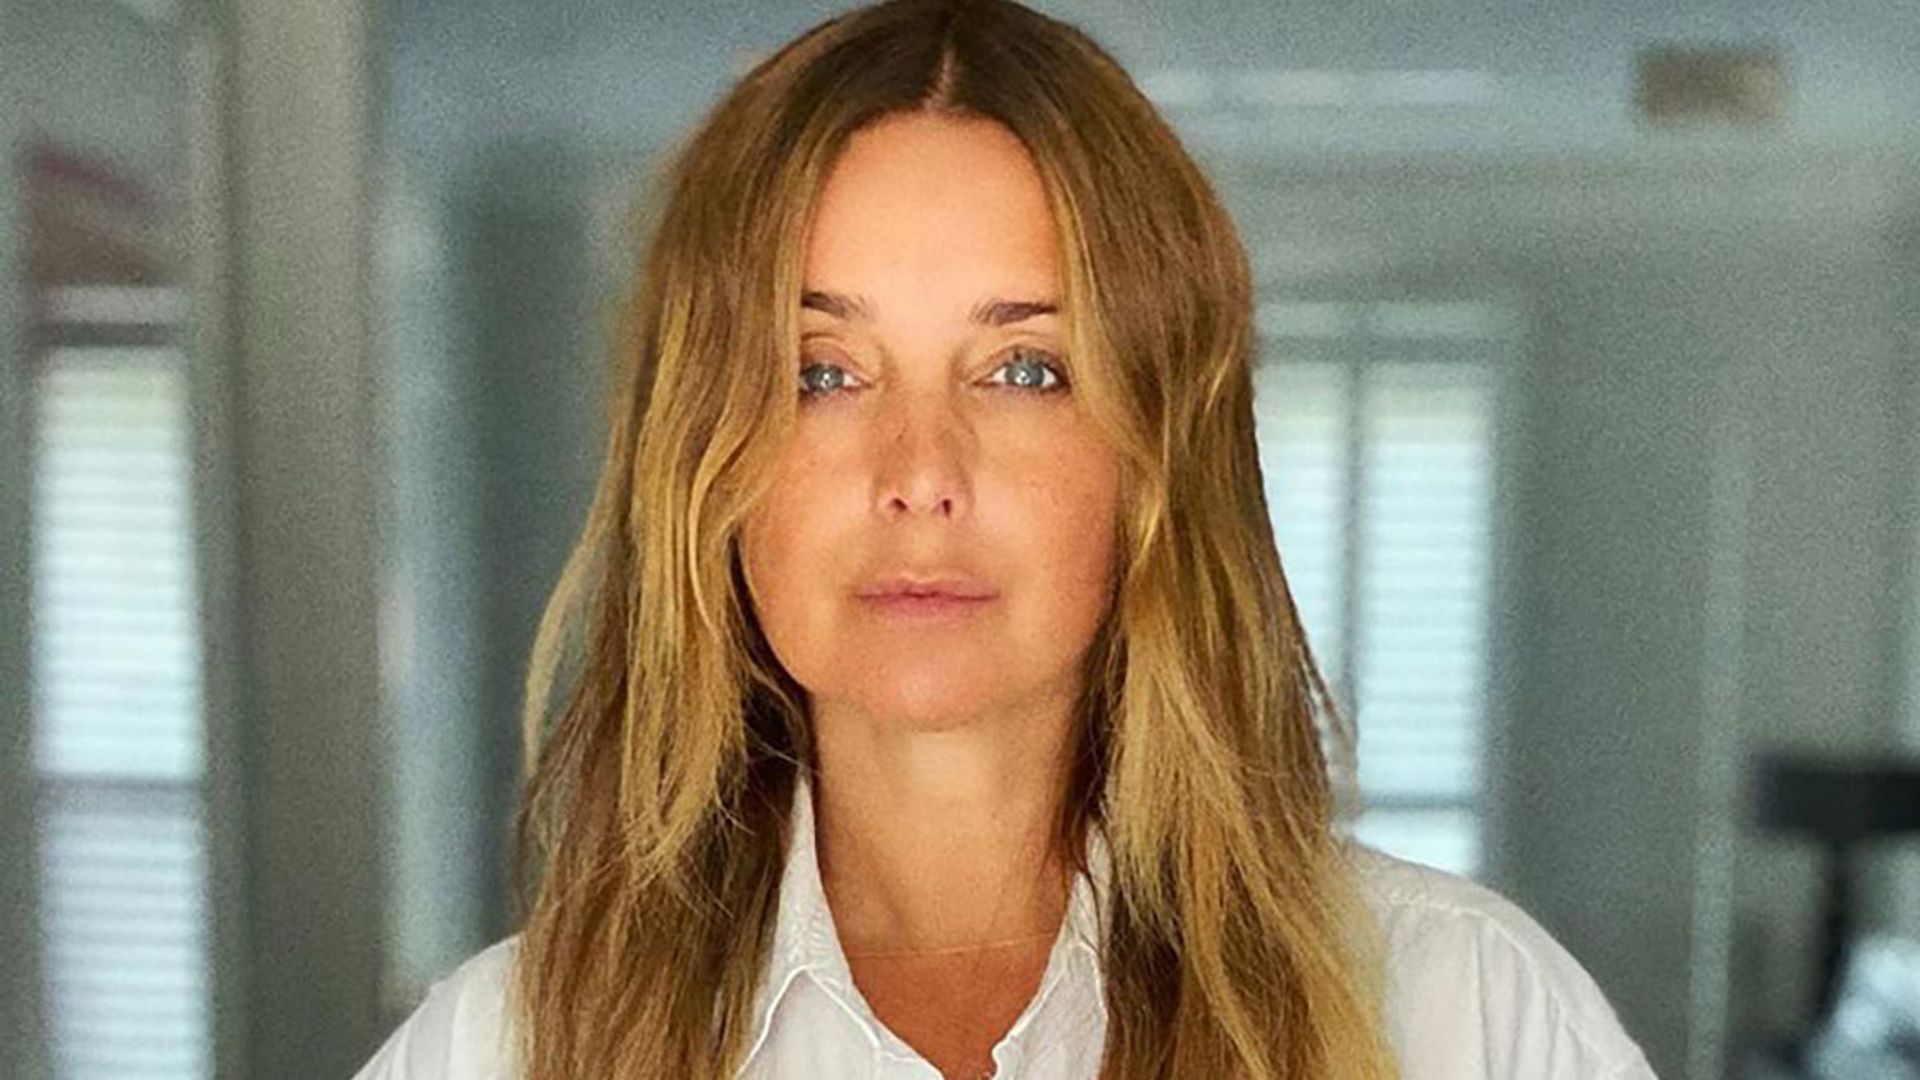 Louise Redknapp's totally unexpected fashion statement might be her best yet